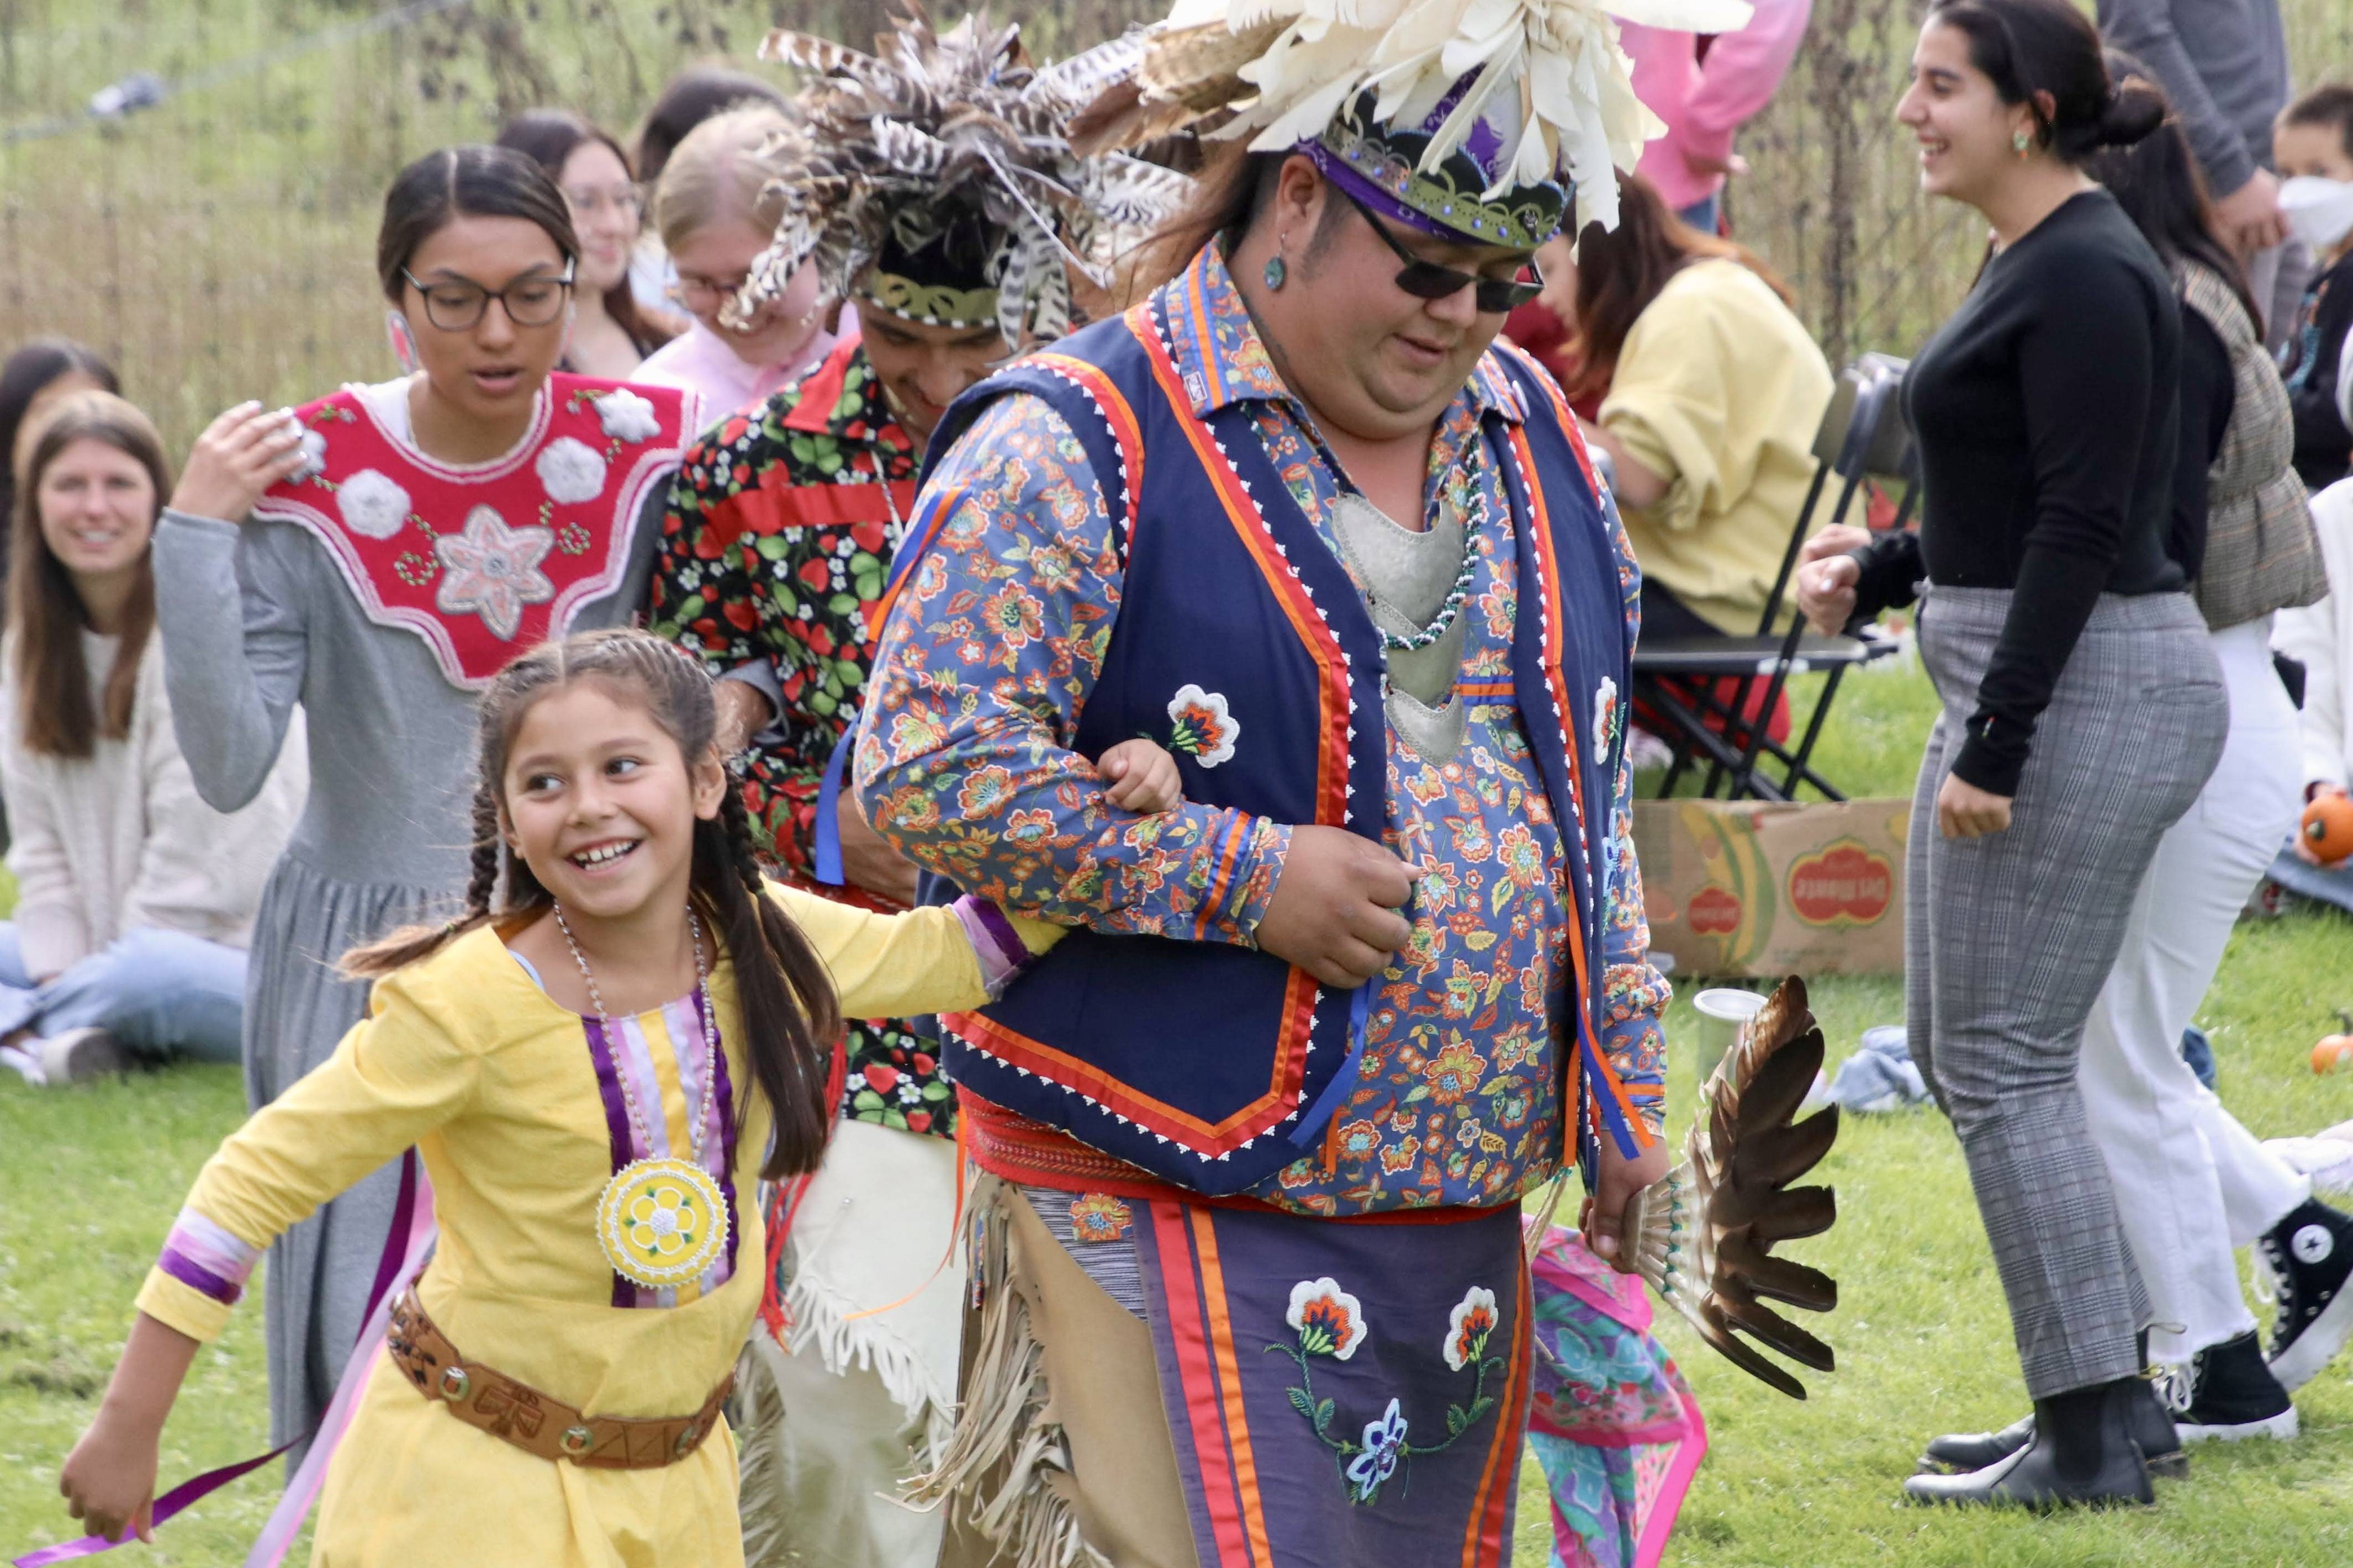 A girl in a yellow dress links arms with one of the Haudenosaunee dancers at the Fall Festival.